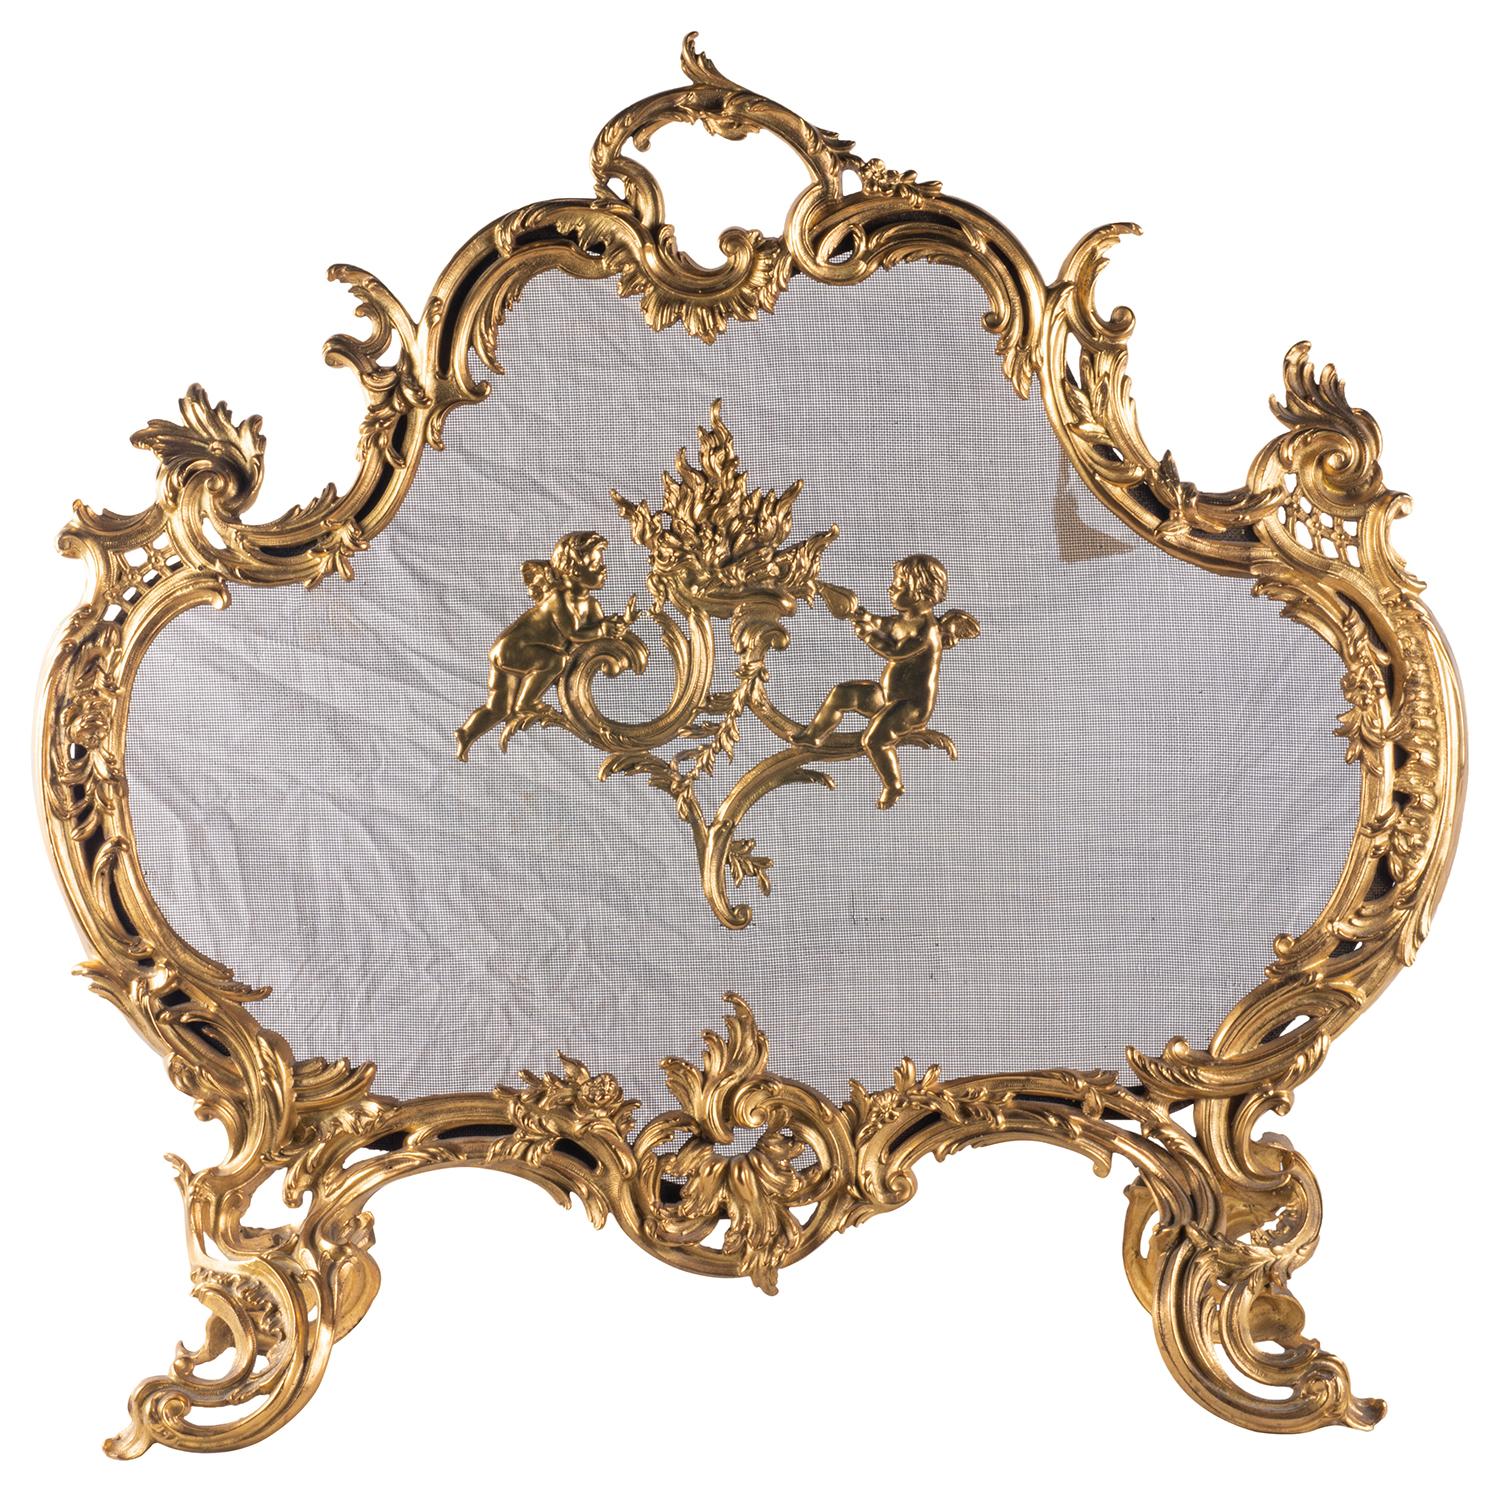 A very good quality late 19th century French gilded ormolu, Louis XVI style Rococo influenced fire screen, having wonderful scrolling foliate decoration.
   